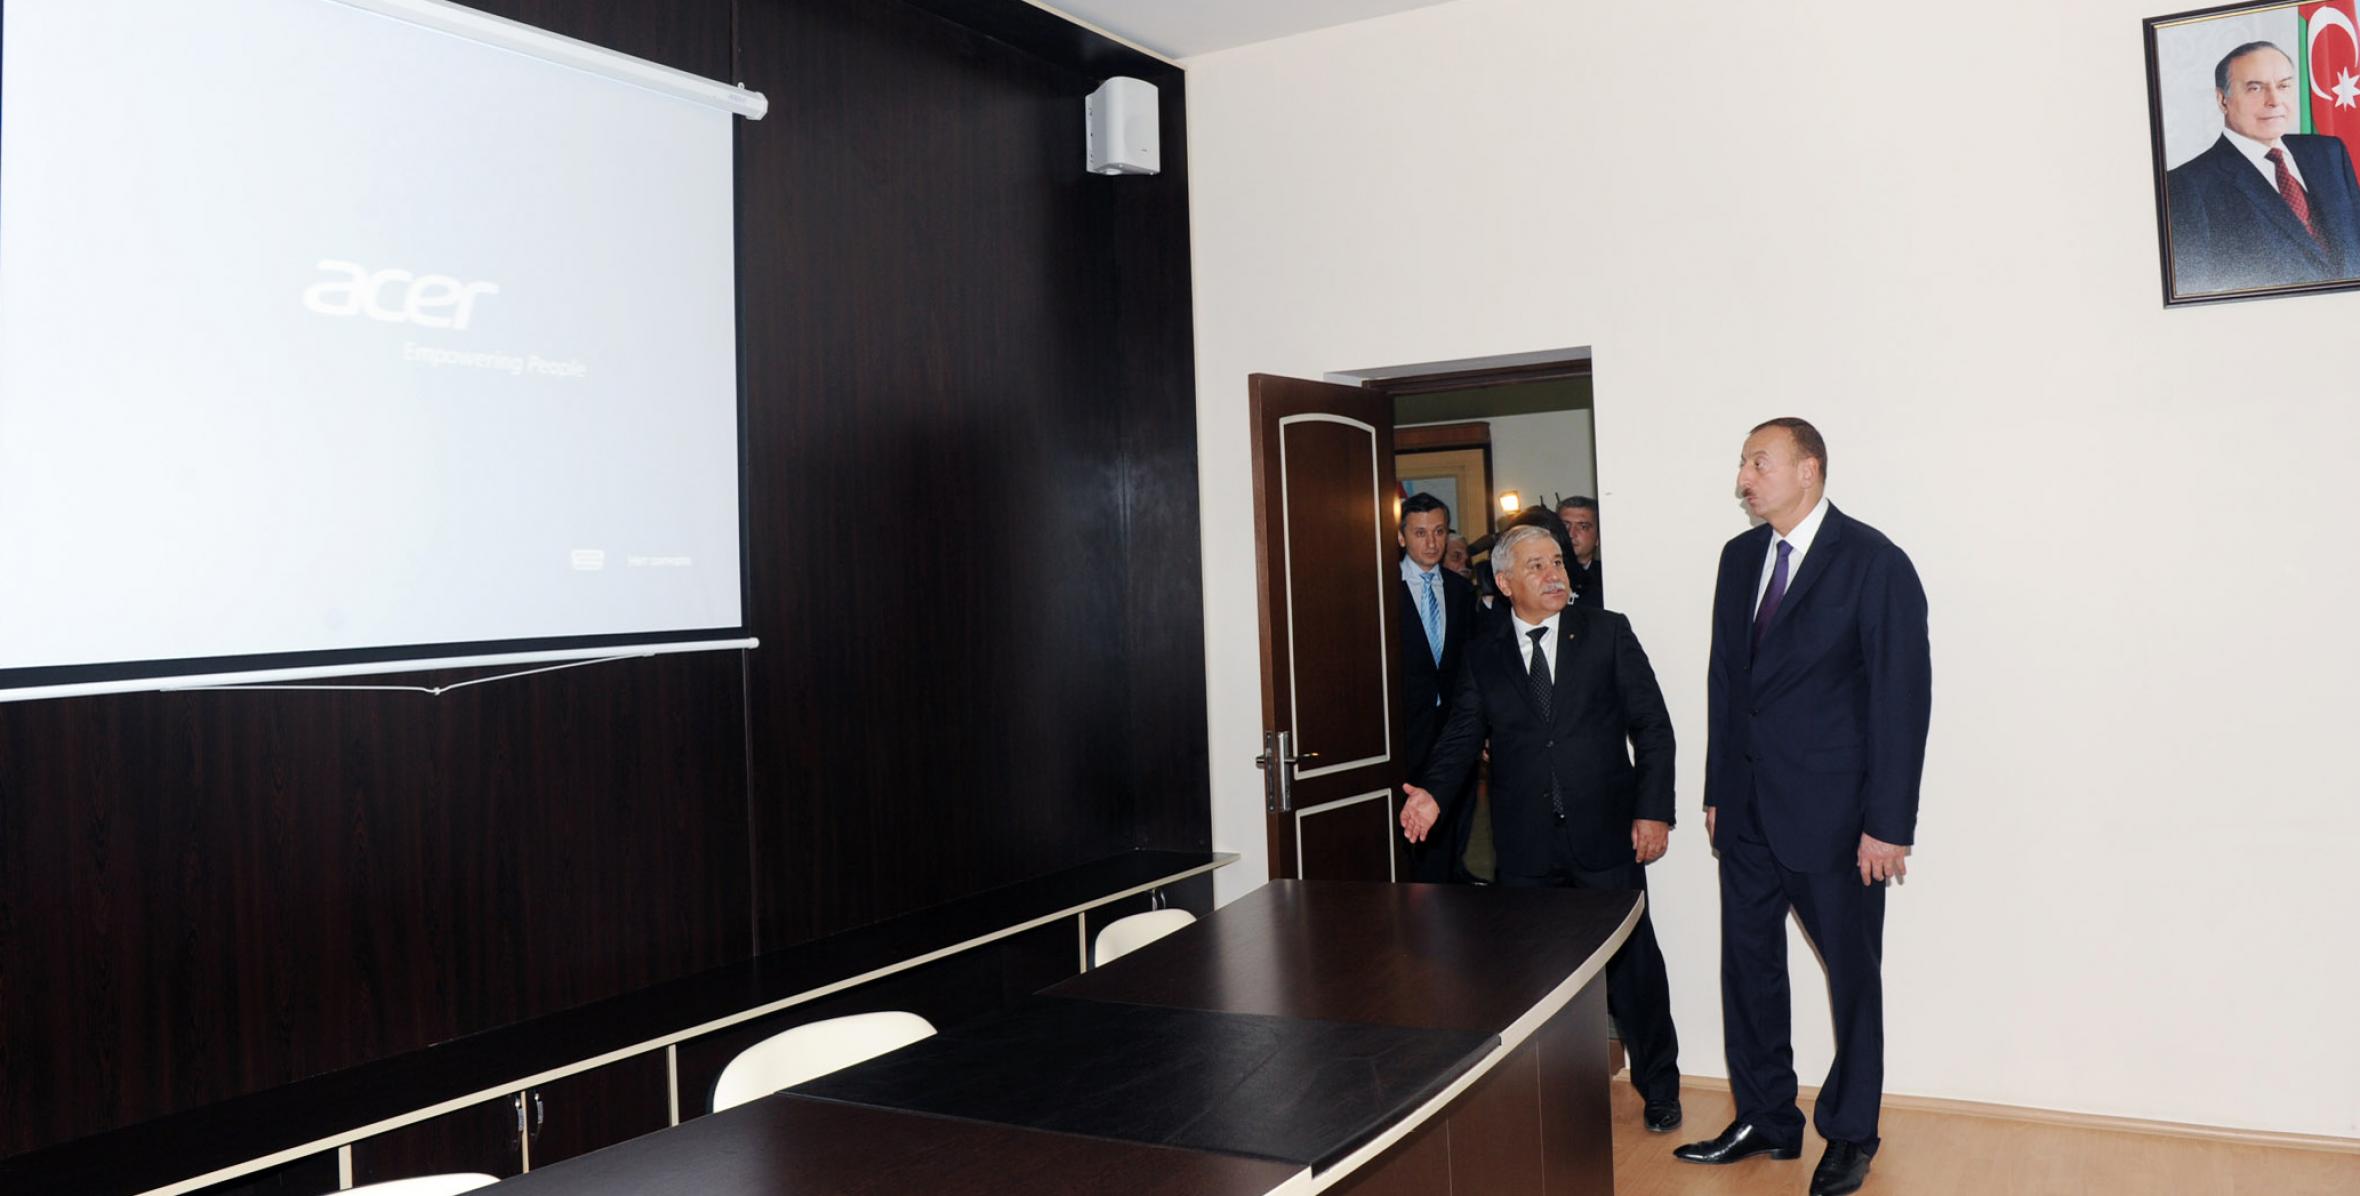 Ilham Aliyev attended the opening of a Youth Center in Zardab